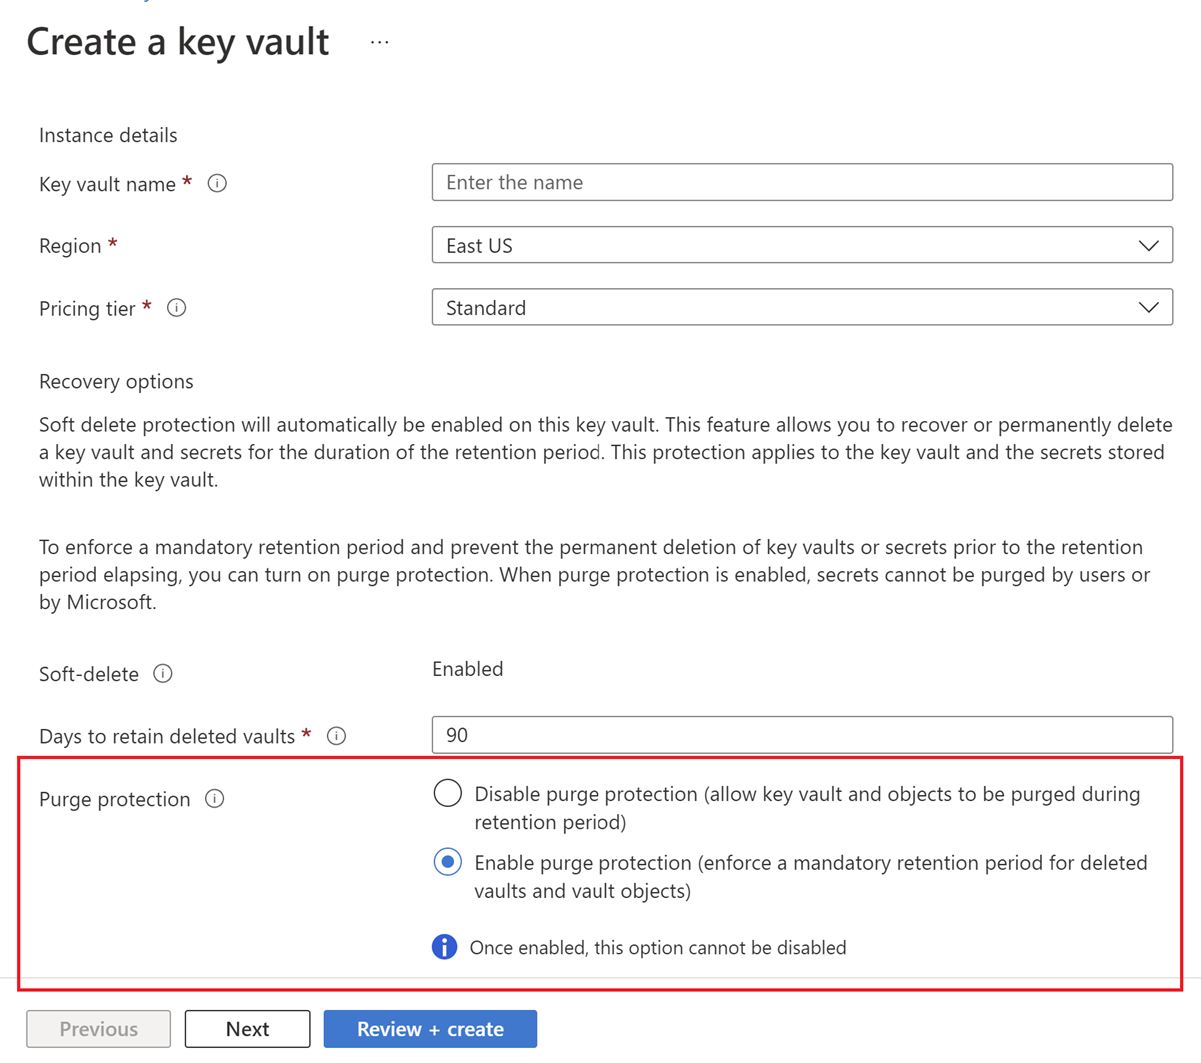 Screenshot that shows how to enable purge protection when creating a new key vault in the Azure portal.